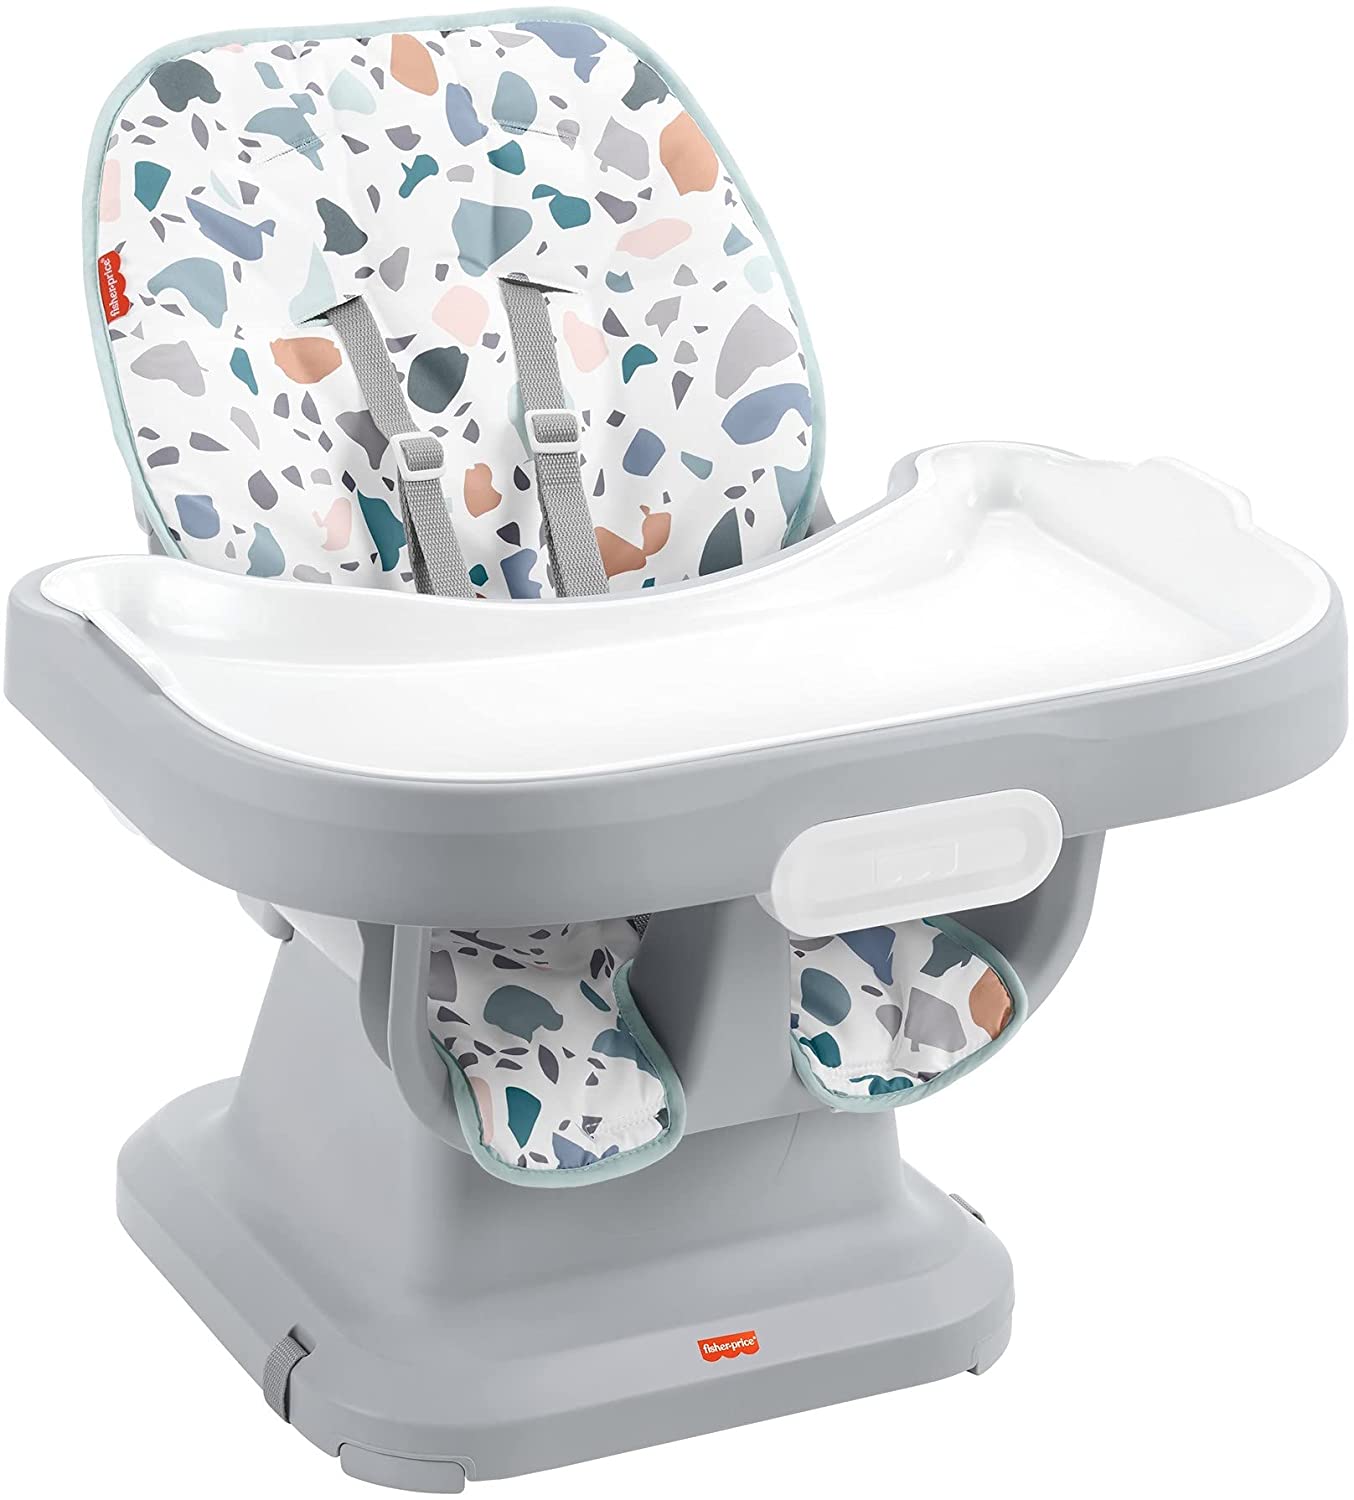 8. Fisher-Price Spacesaver Simple Clean High Chair